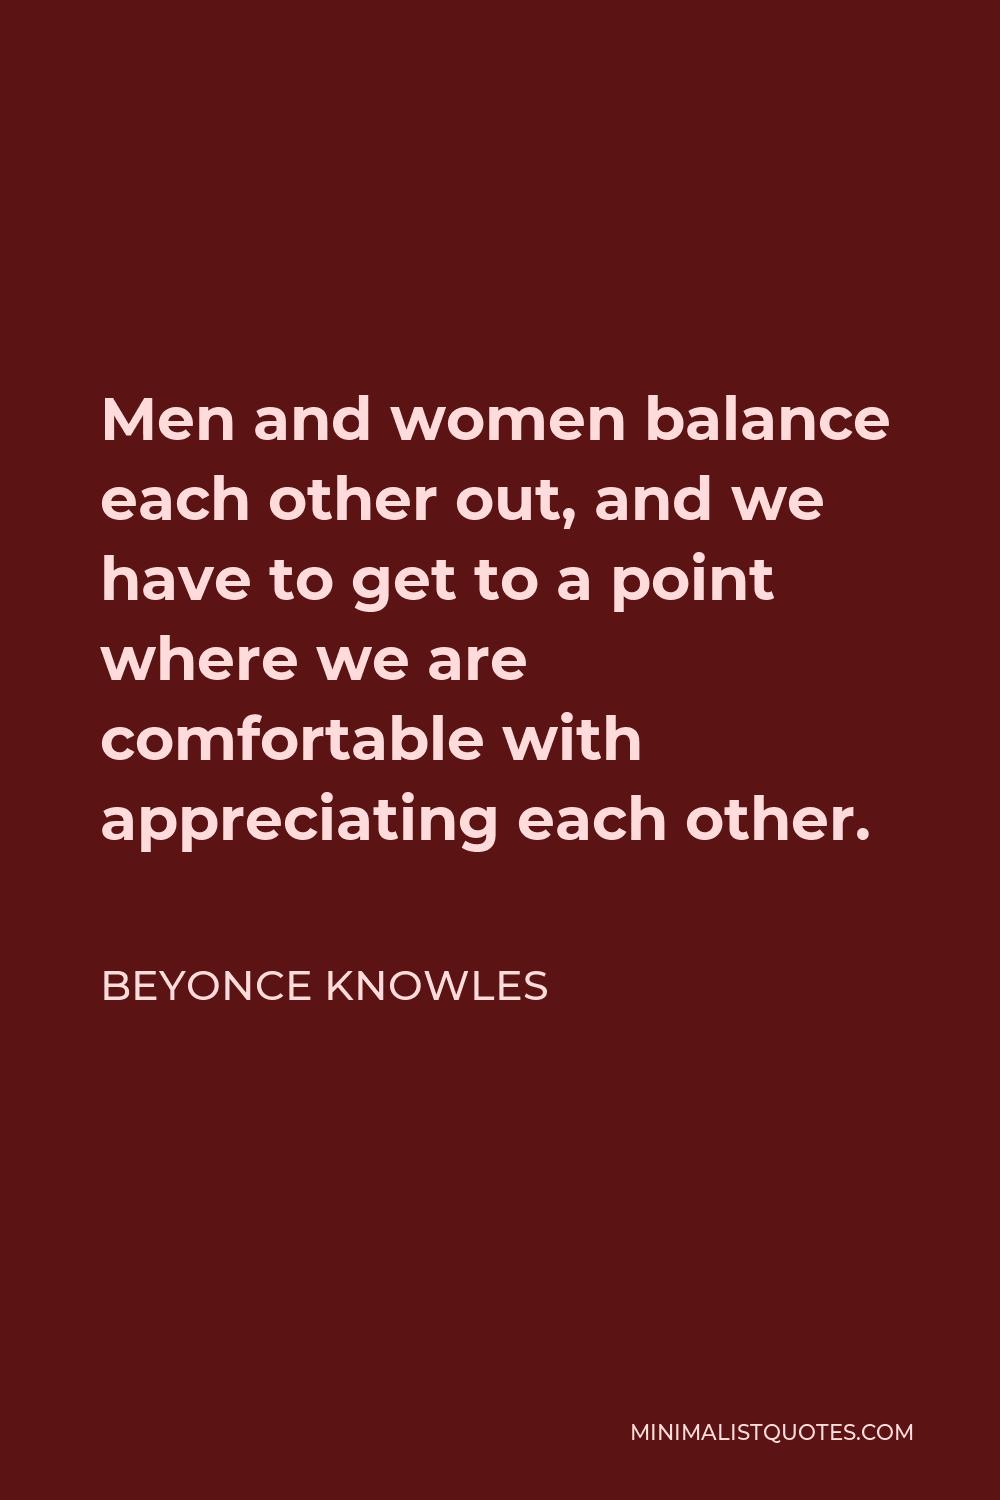 Do Women Need Men or Can We Balance Each Other?